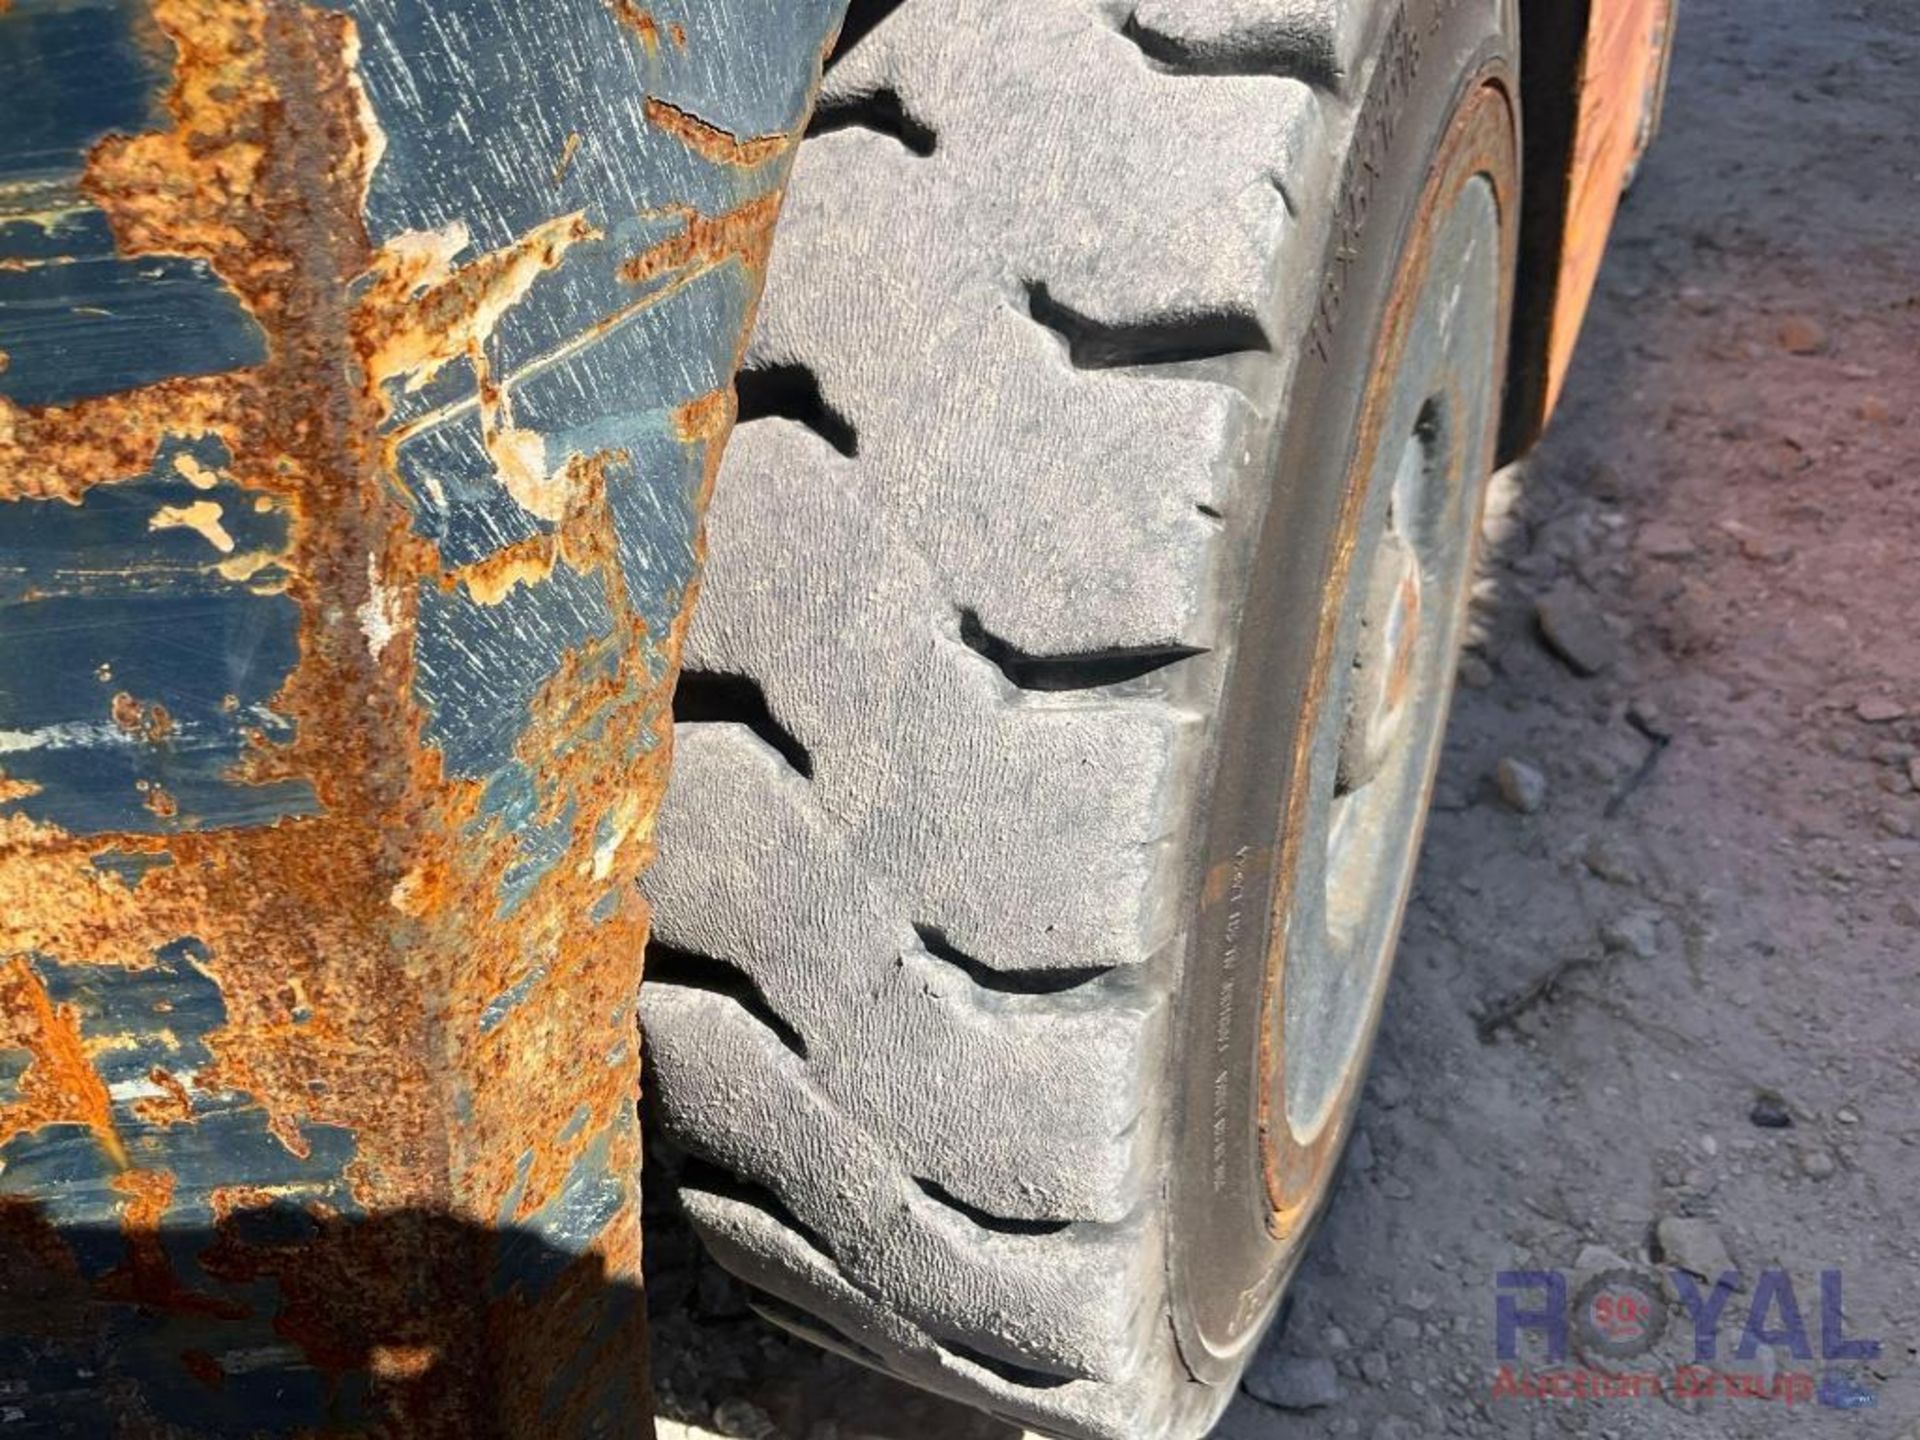 1991 Toyota 5FGC20 3,550LB Cushion Tire Forklift - Image 18 of 22